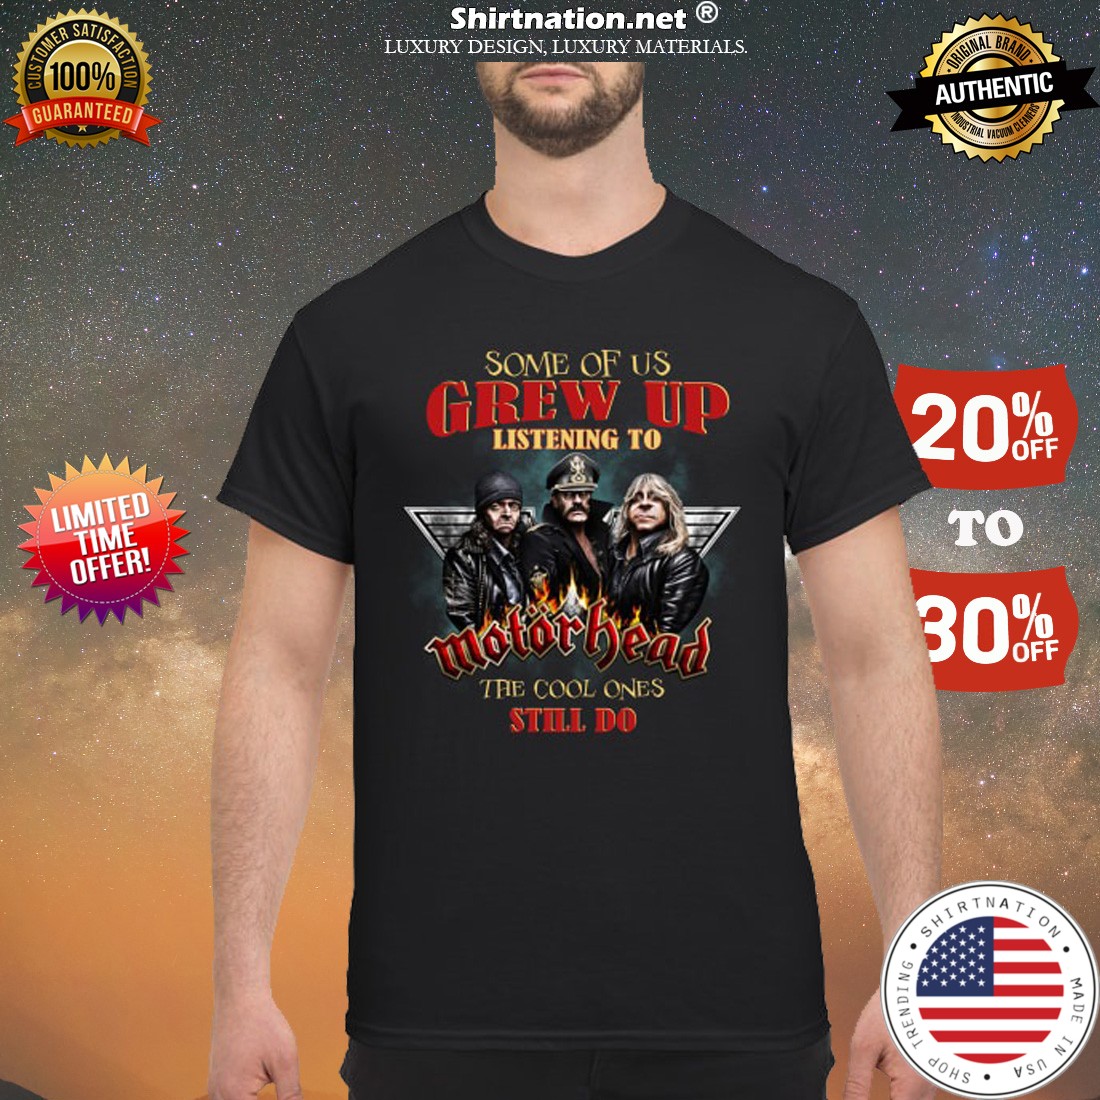 Some of us grew up listening up motorhead the cool ones still do shirt